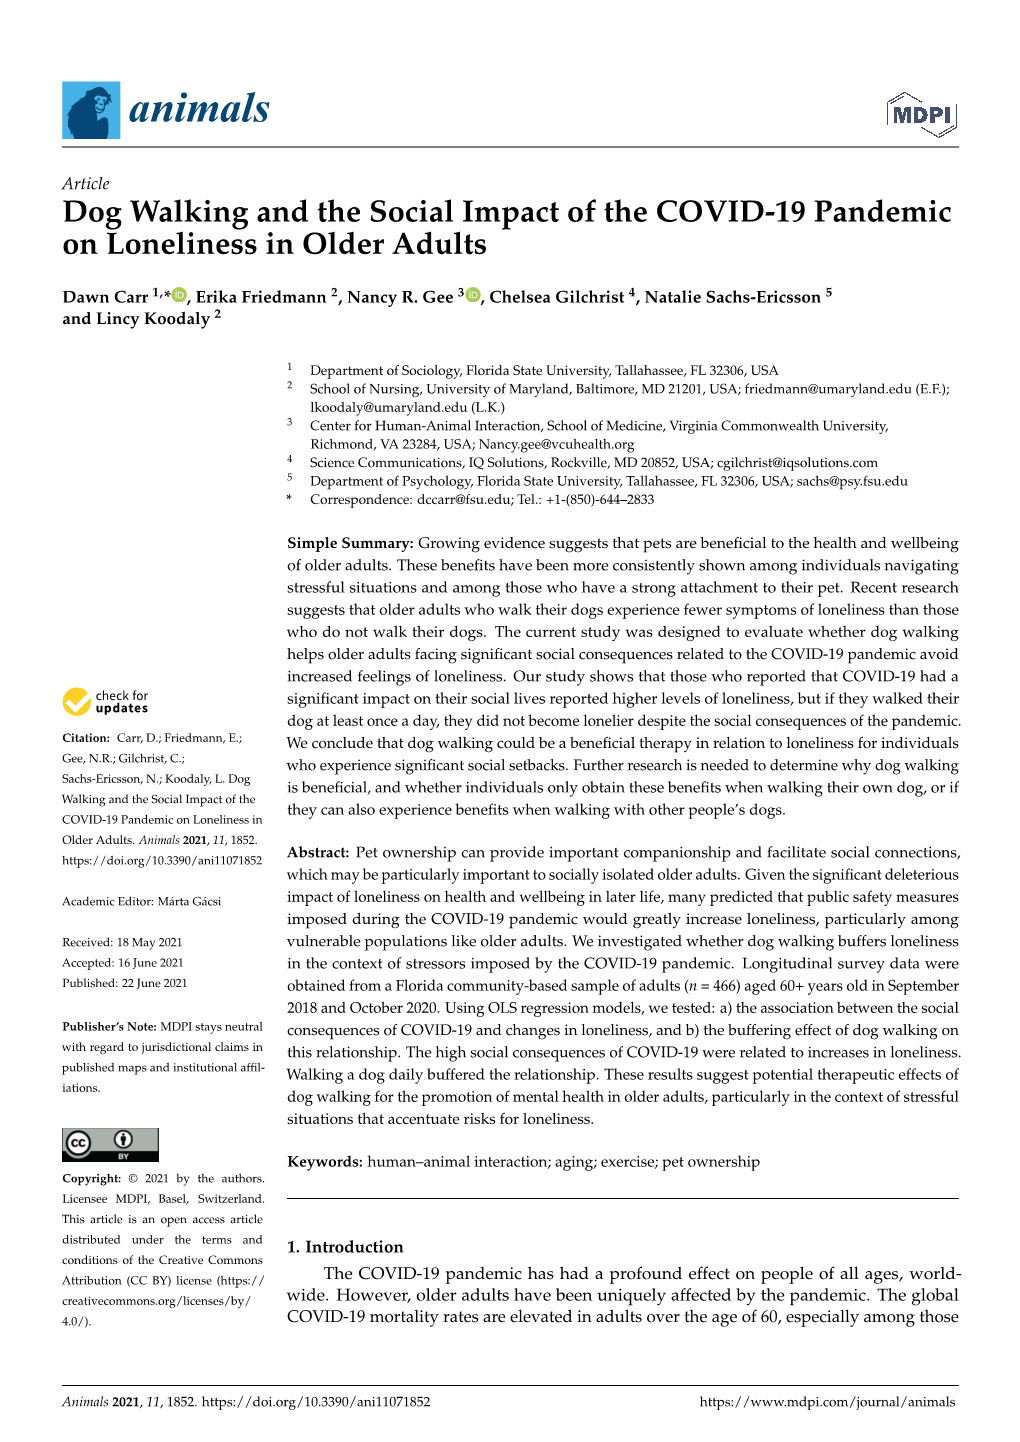 Dog Walking and the Social Impact of the COVID-19 Pandemic on Loneliness in Older Adults